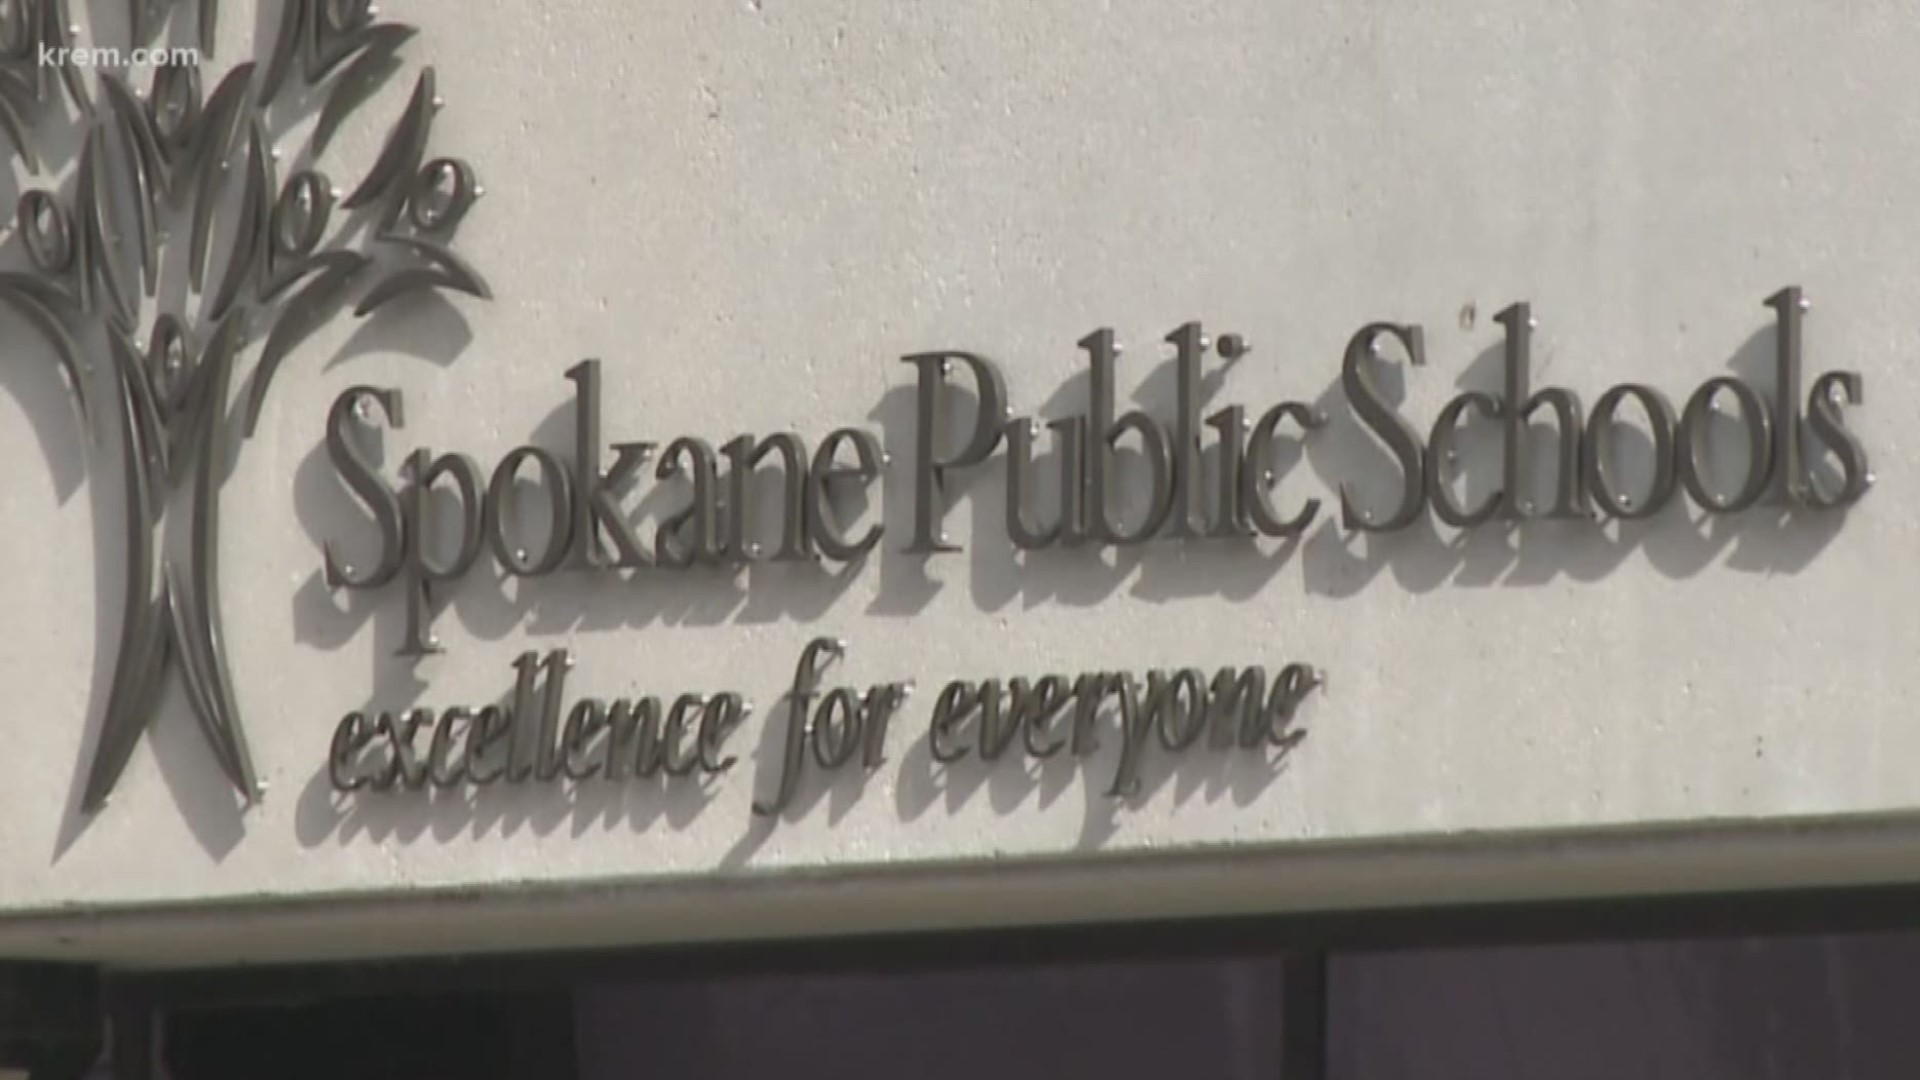 More than 85 percent of SPS budget will be spent on employee salaries (8-30-18)